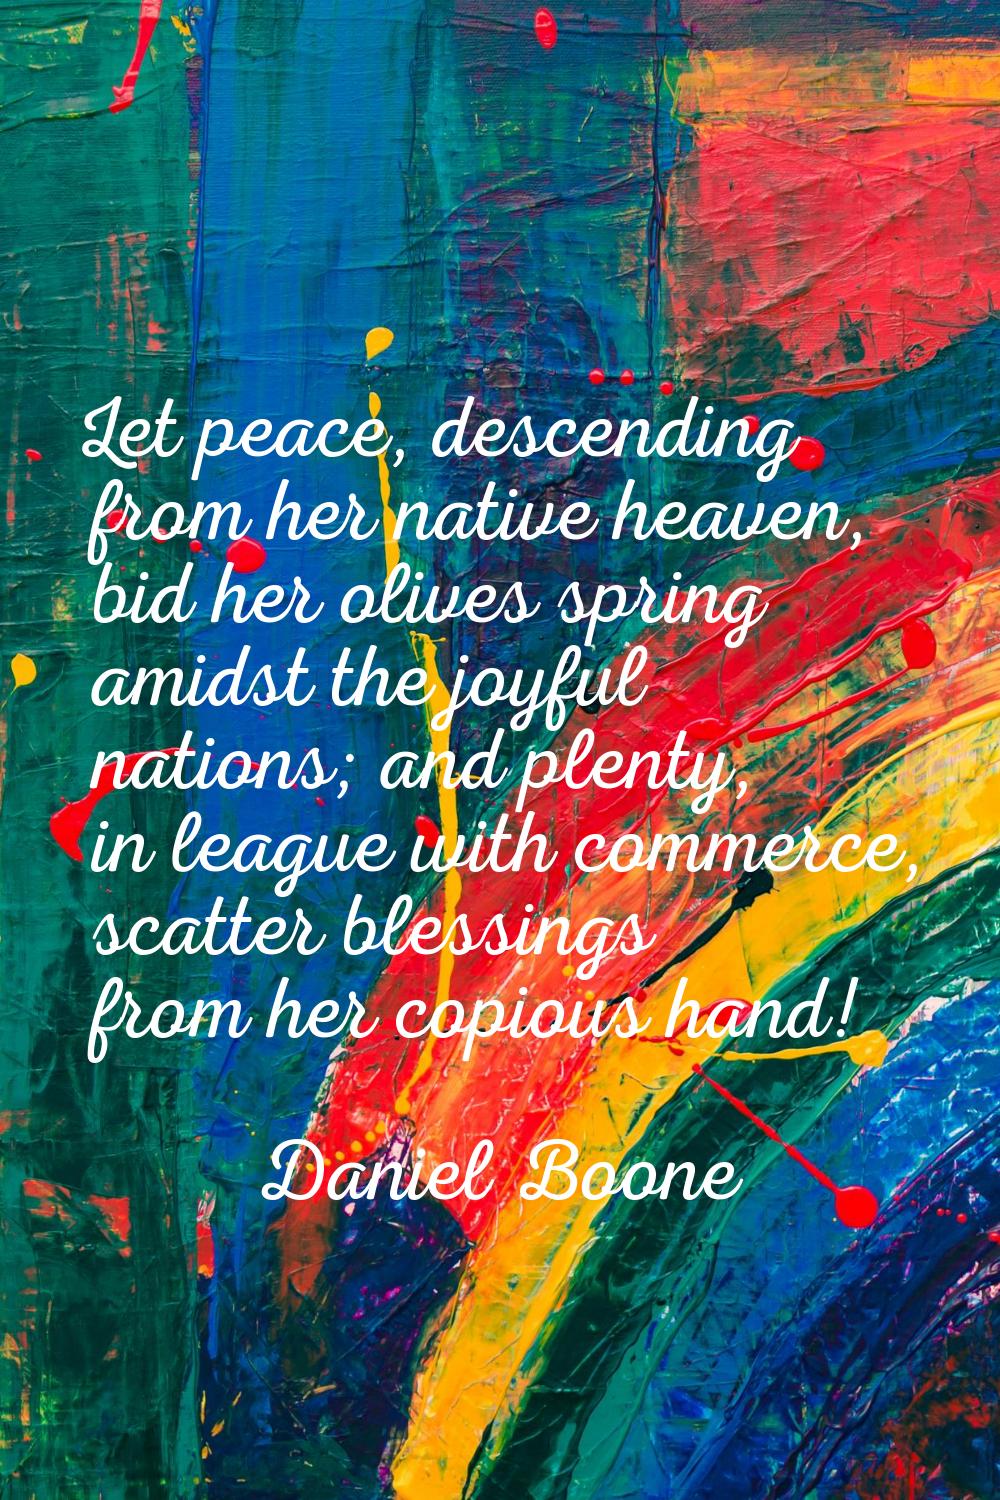 Let peace, descending from her native heaven, bid her olives spring amidst the joyful nations; and 